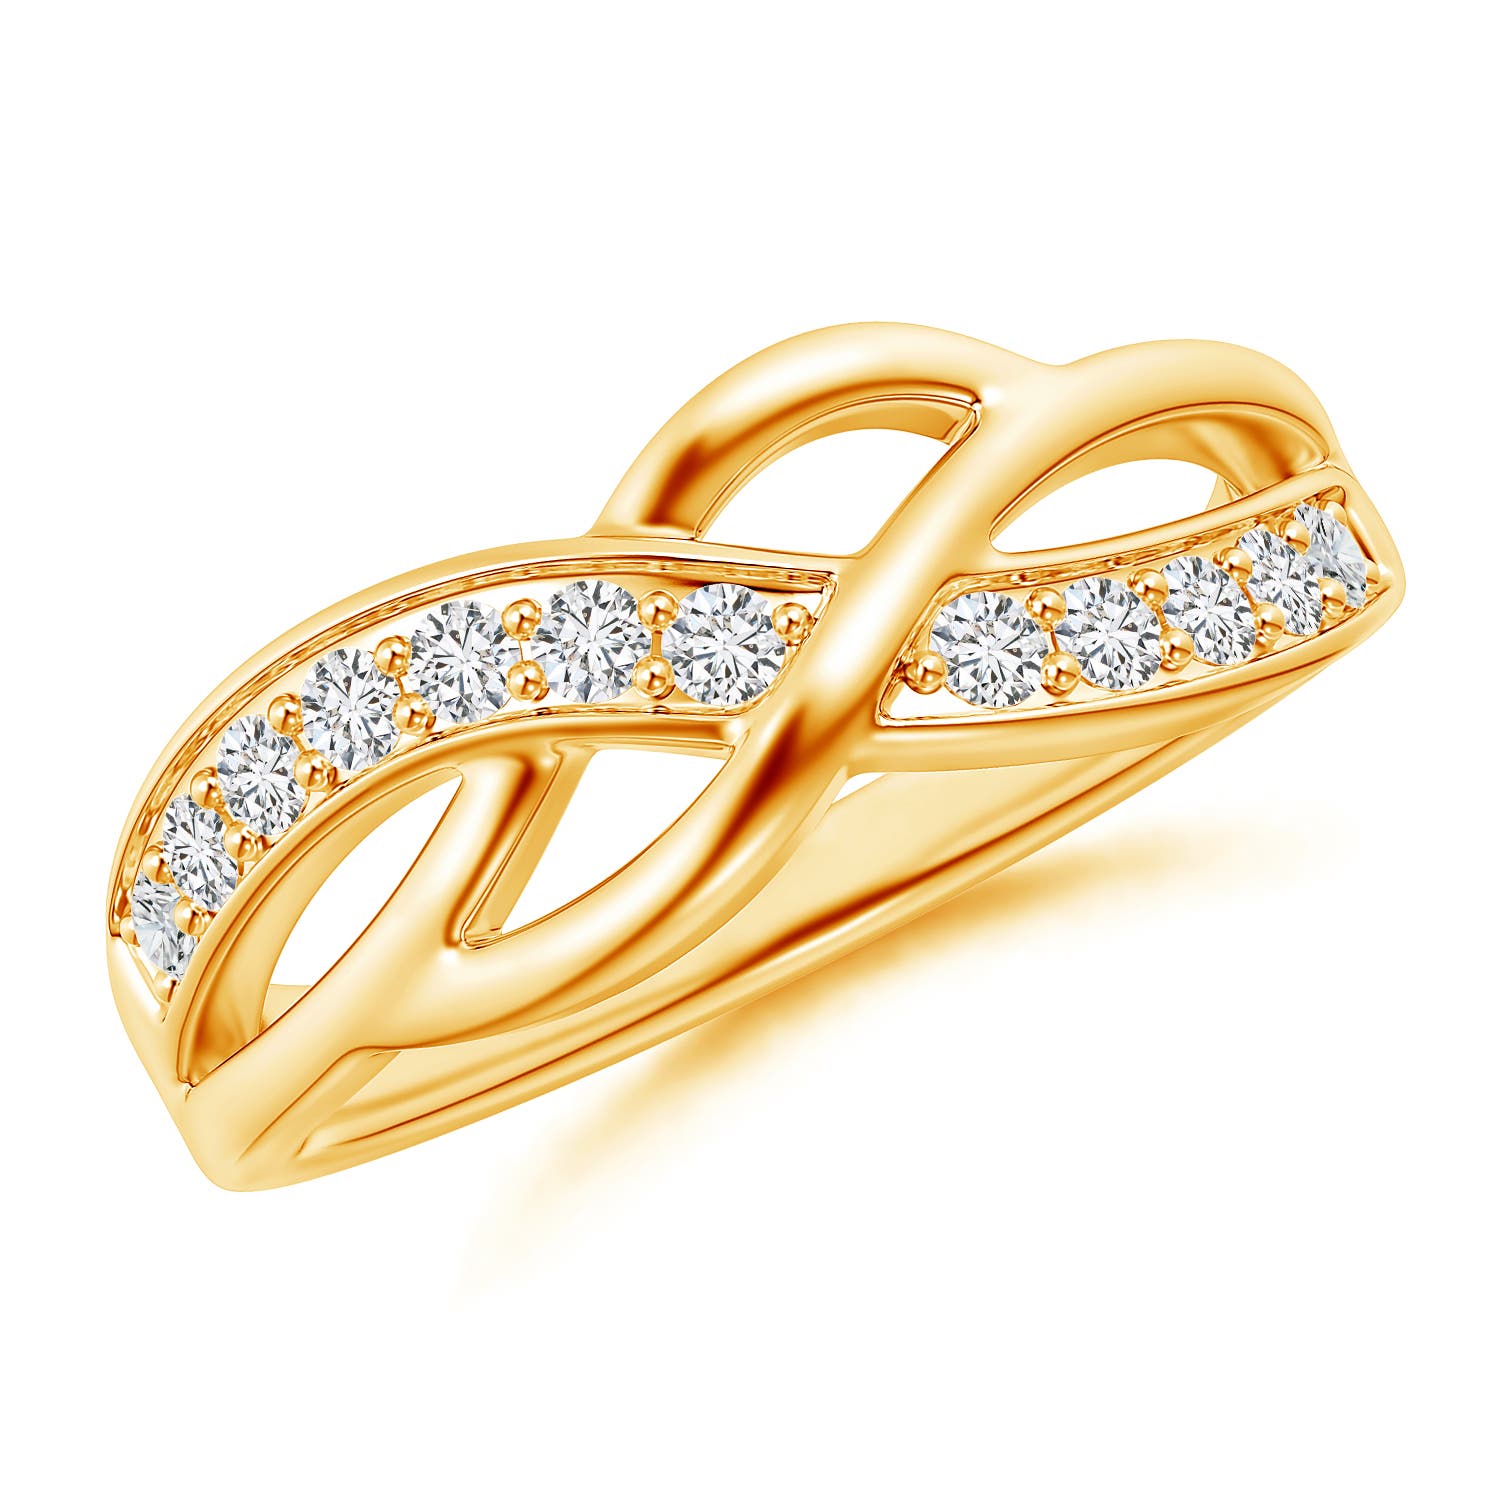 H, SI2 / 0.32 CT / 14 KT Yellow Gold